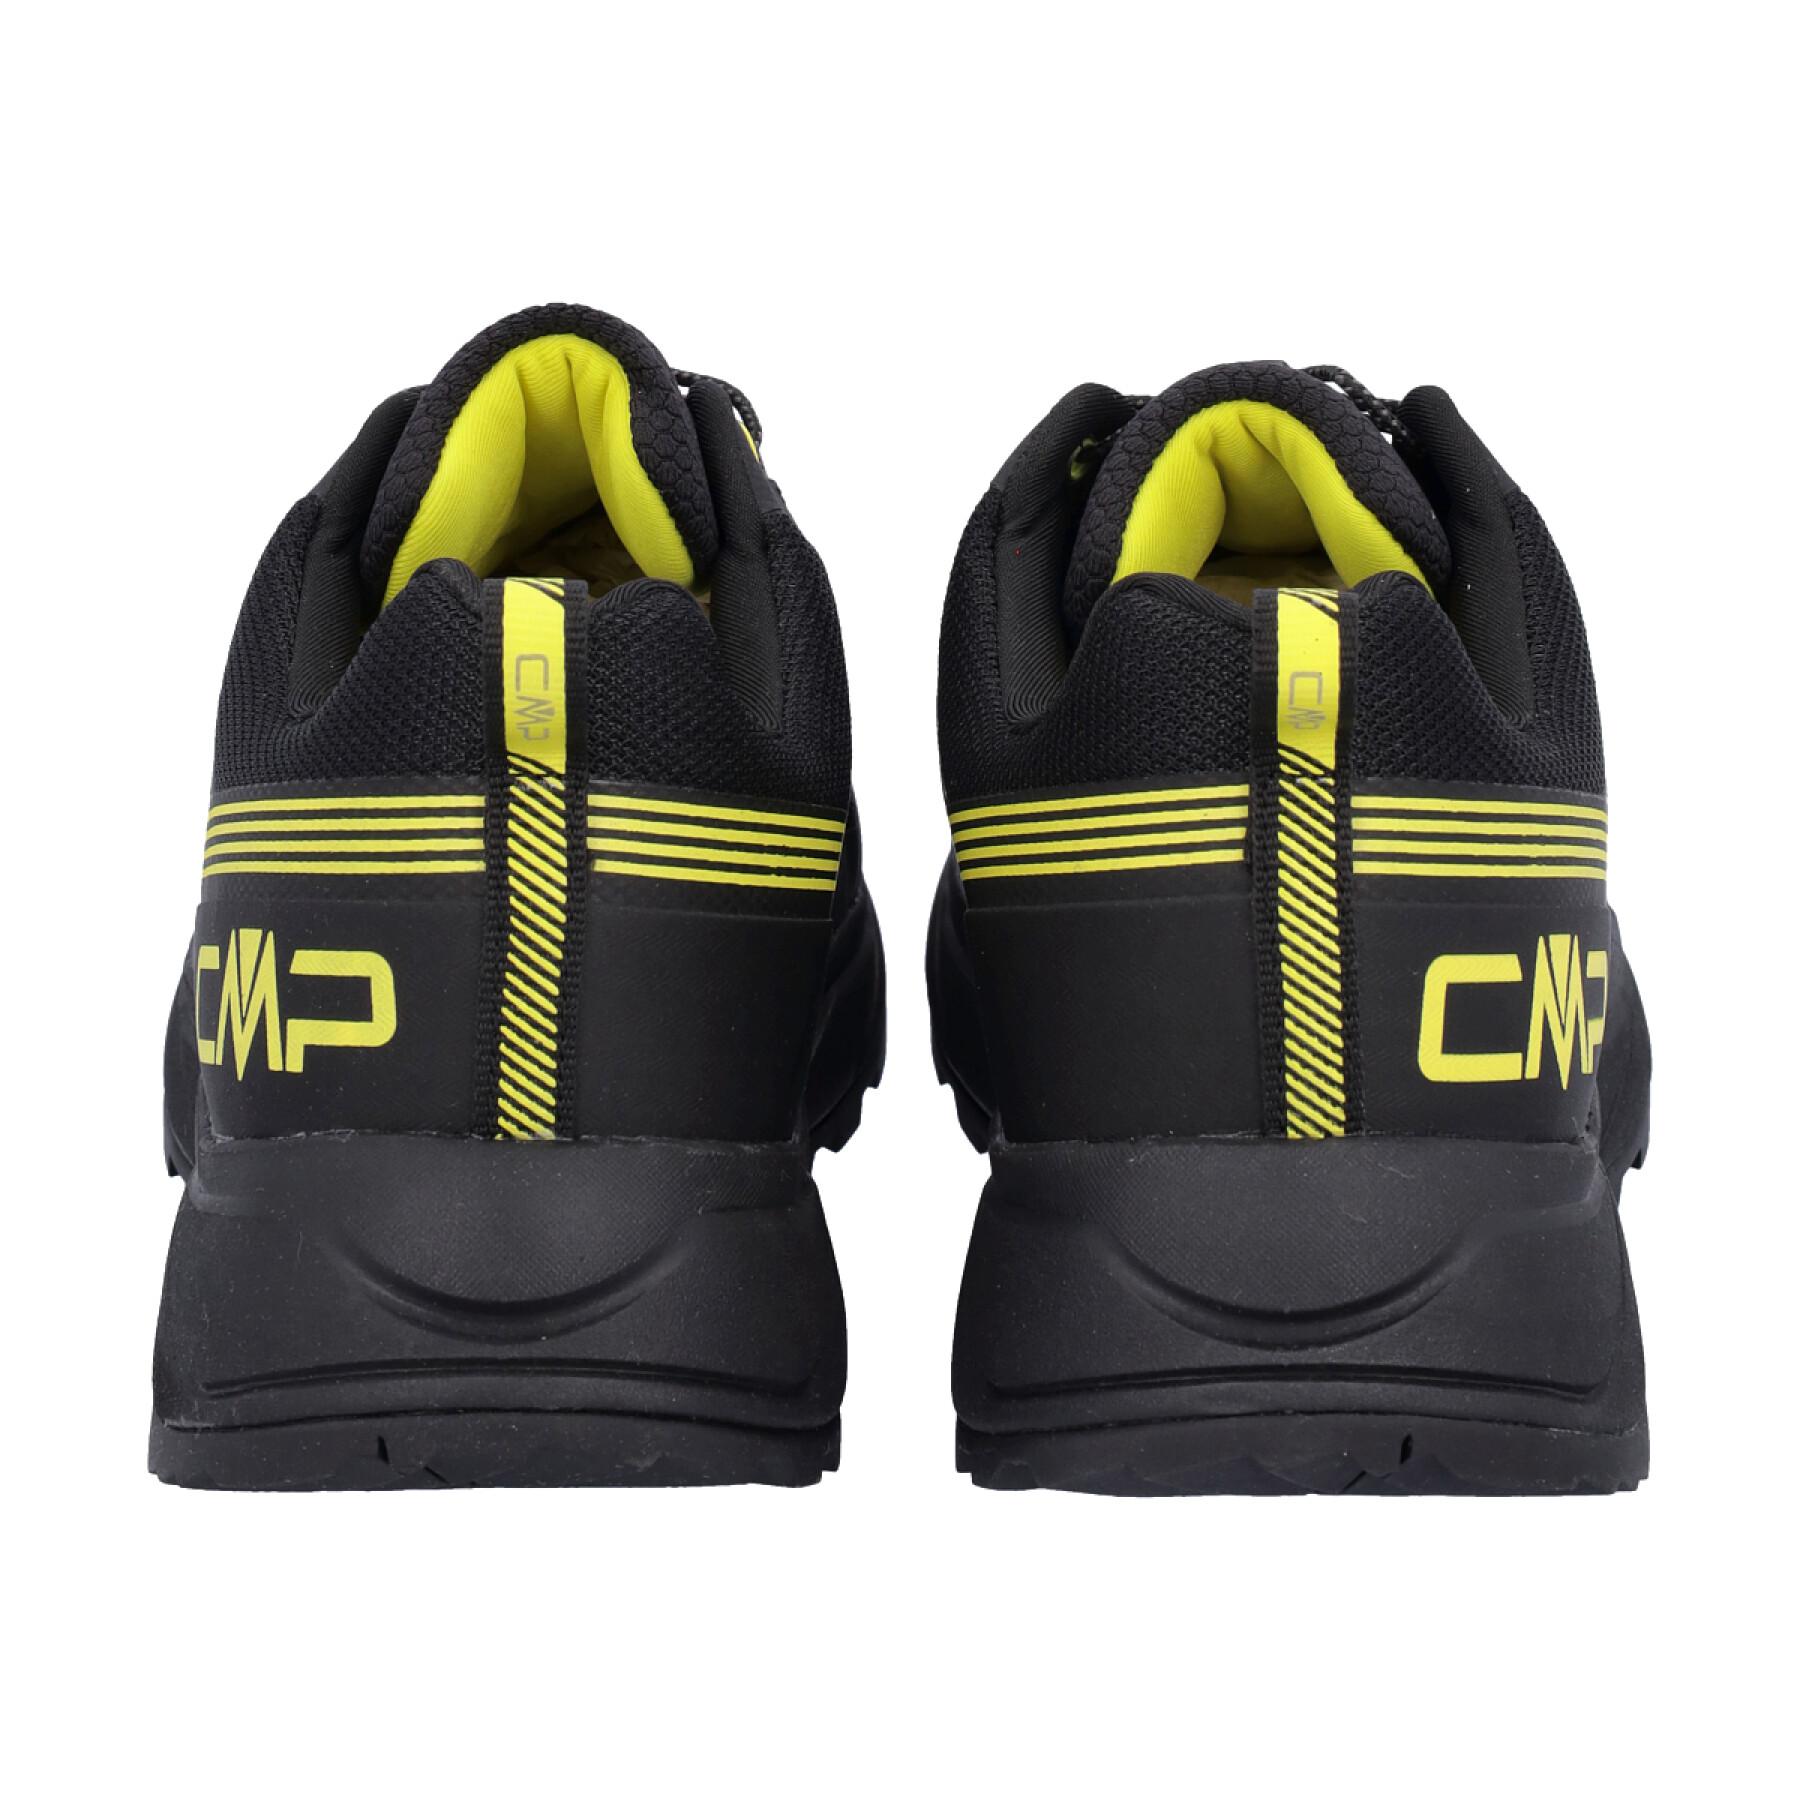 Trail shoes CMP Marco Olmo 2 0